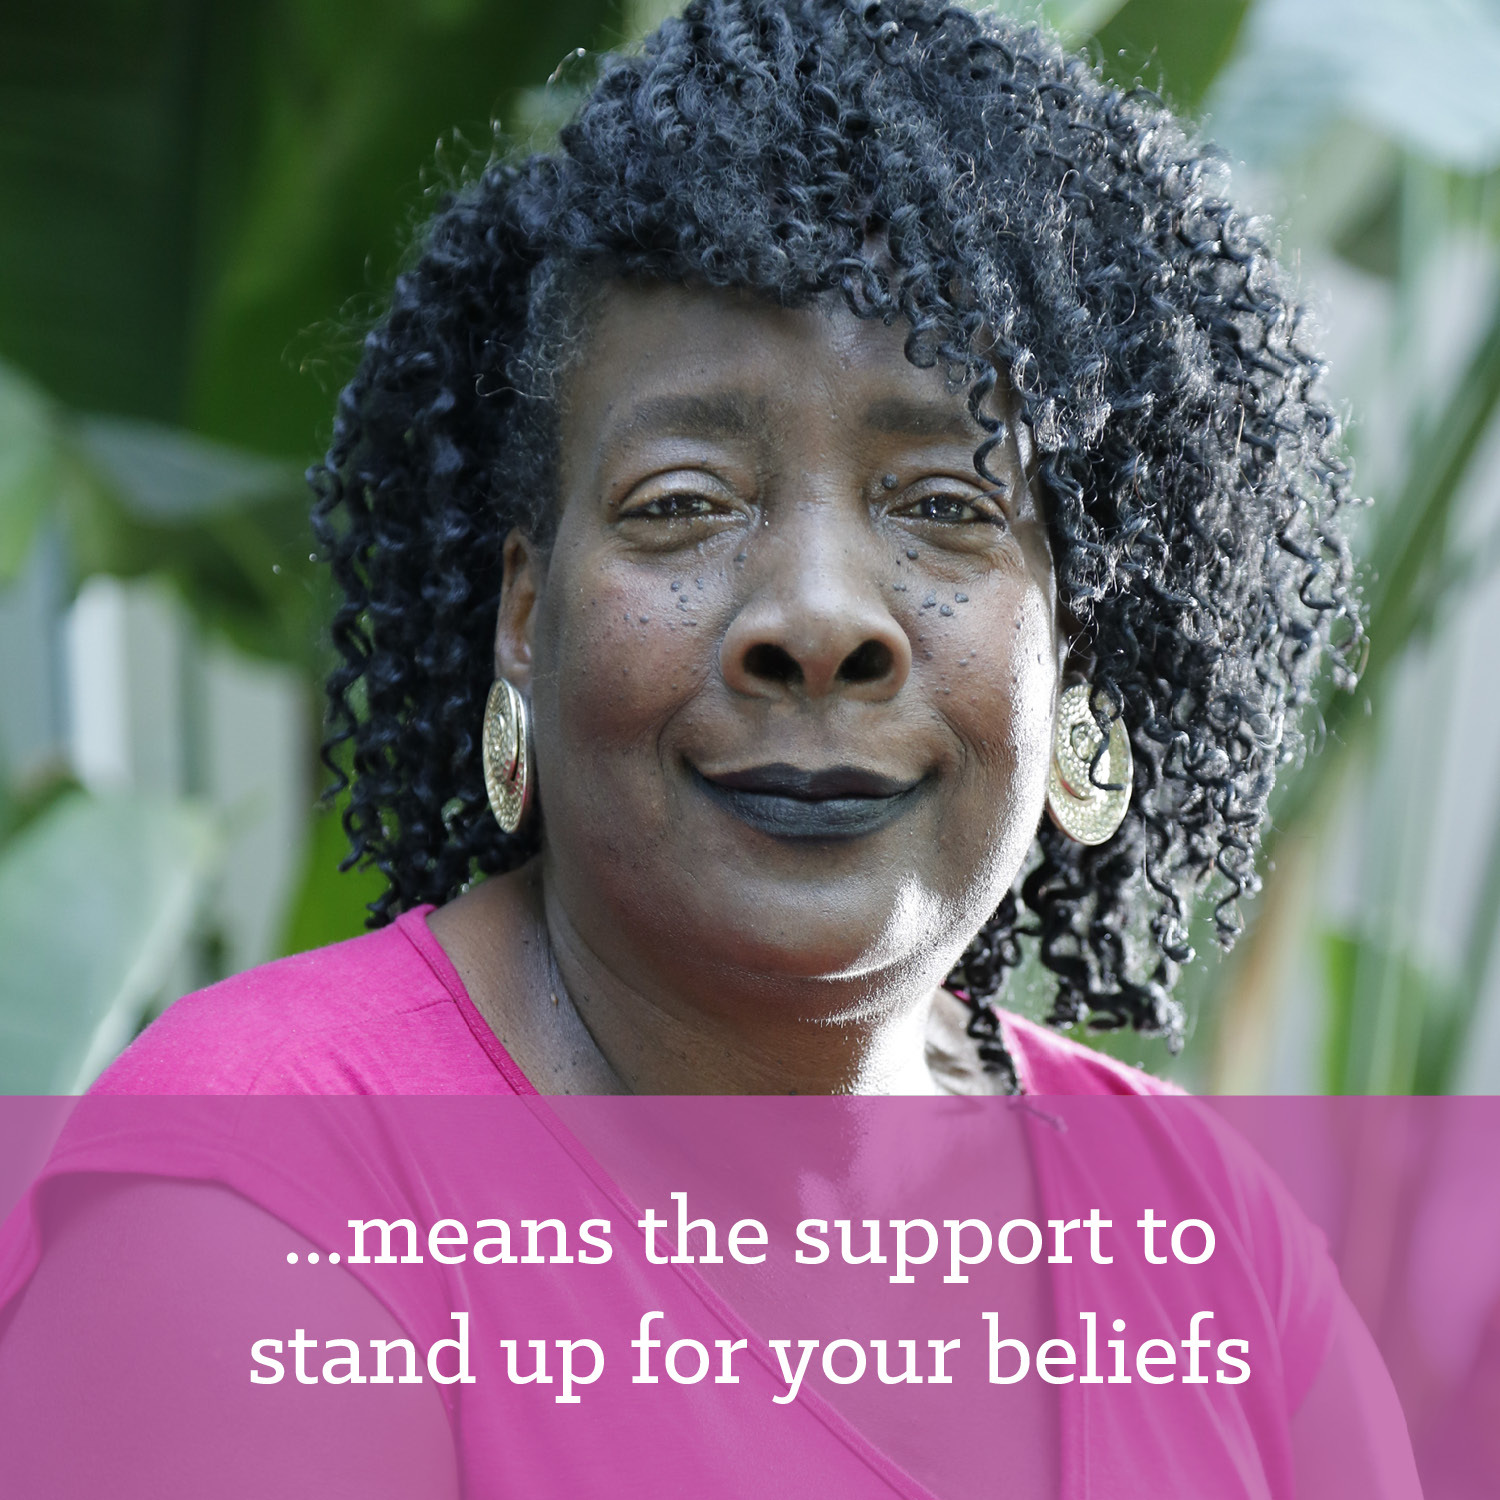 Stand up for your beliefs